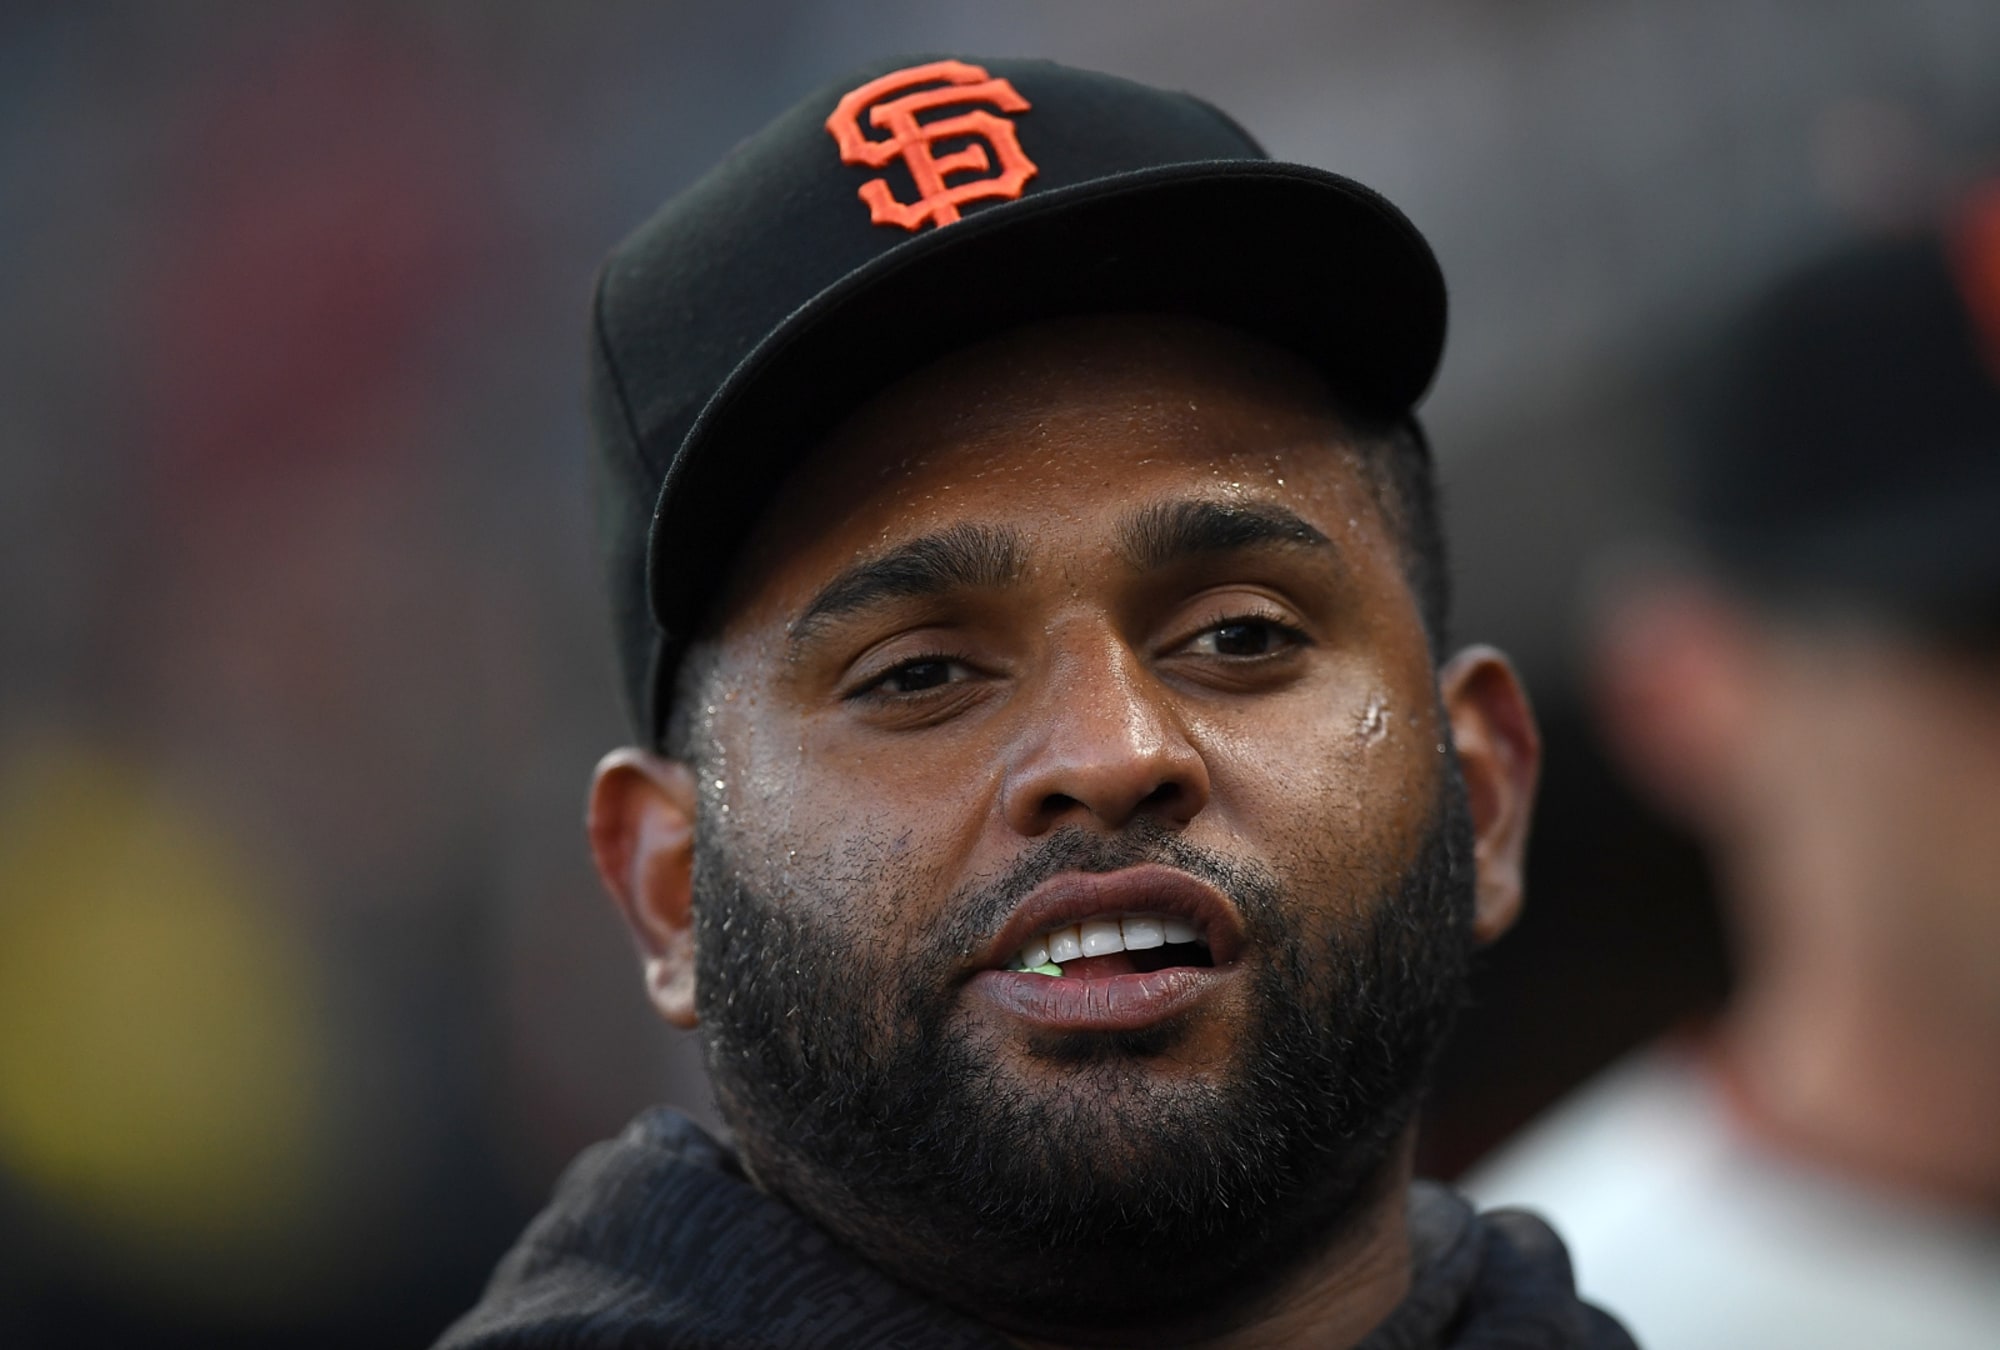 Can we talk about how Pablo Sandoval basically nohit the Dodgers?